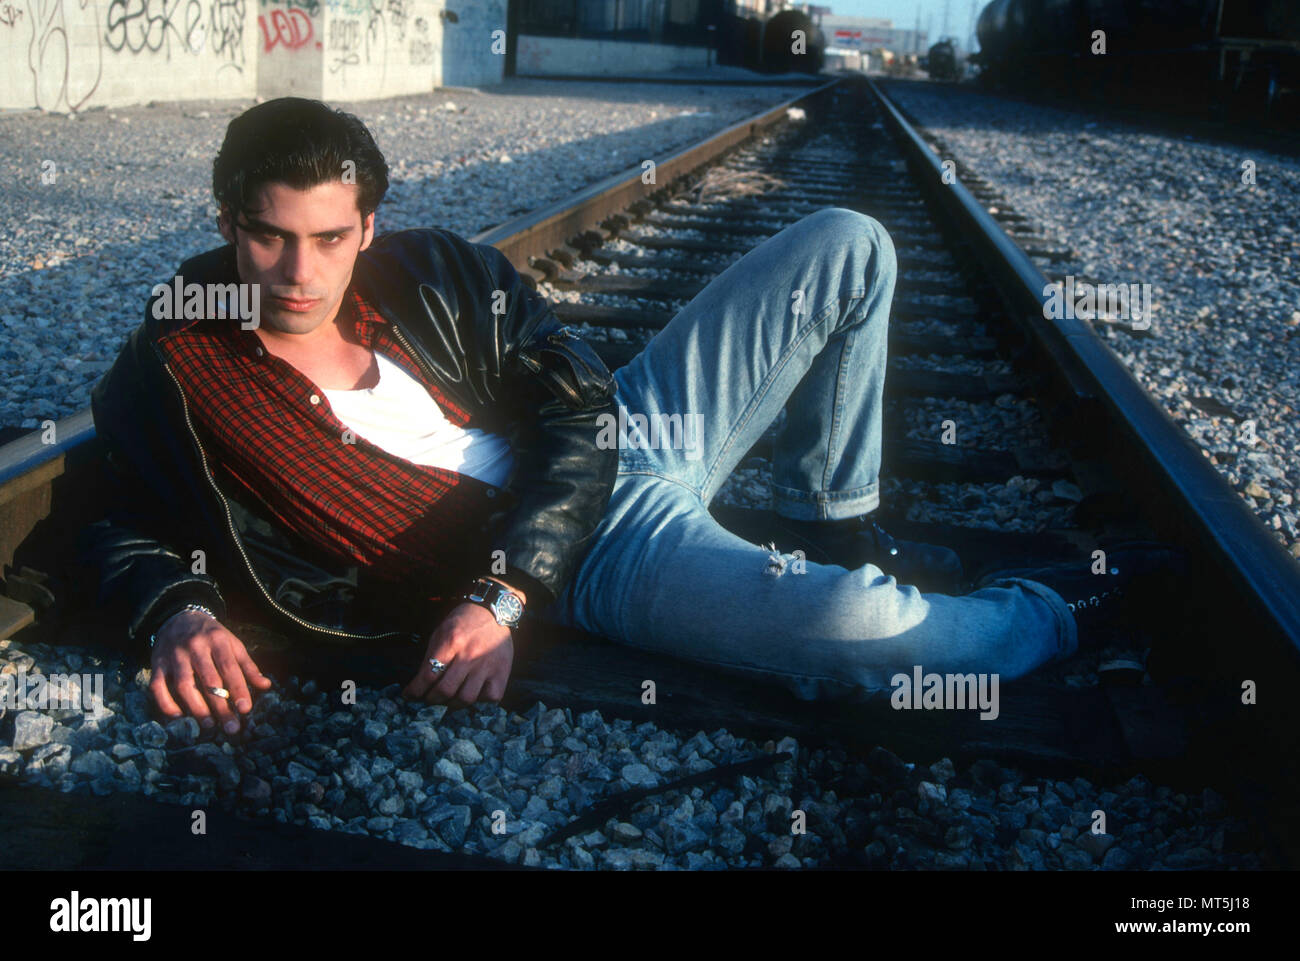 LOS ANGELES, CA - MAY 3: (EXCLUSIVE) Actor Anthony DeSando poses during a photo shoot on May 3, 1991 in Los Angeles, California. Photo by Barry King/Alamy Stock Photo Stock Photo